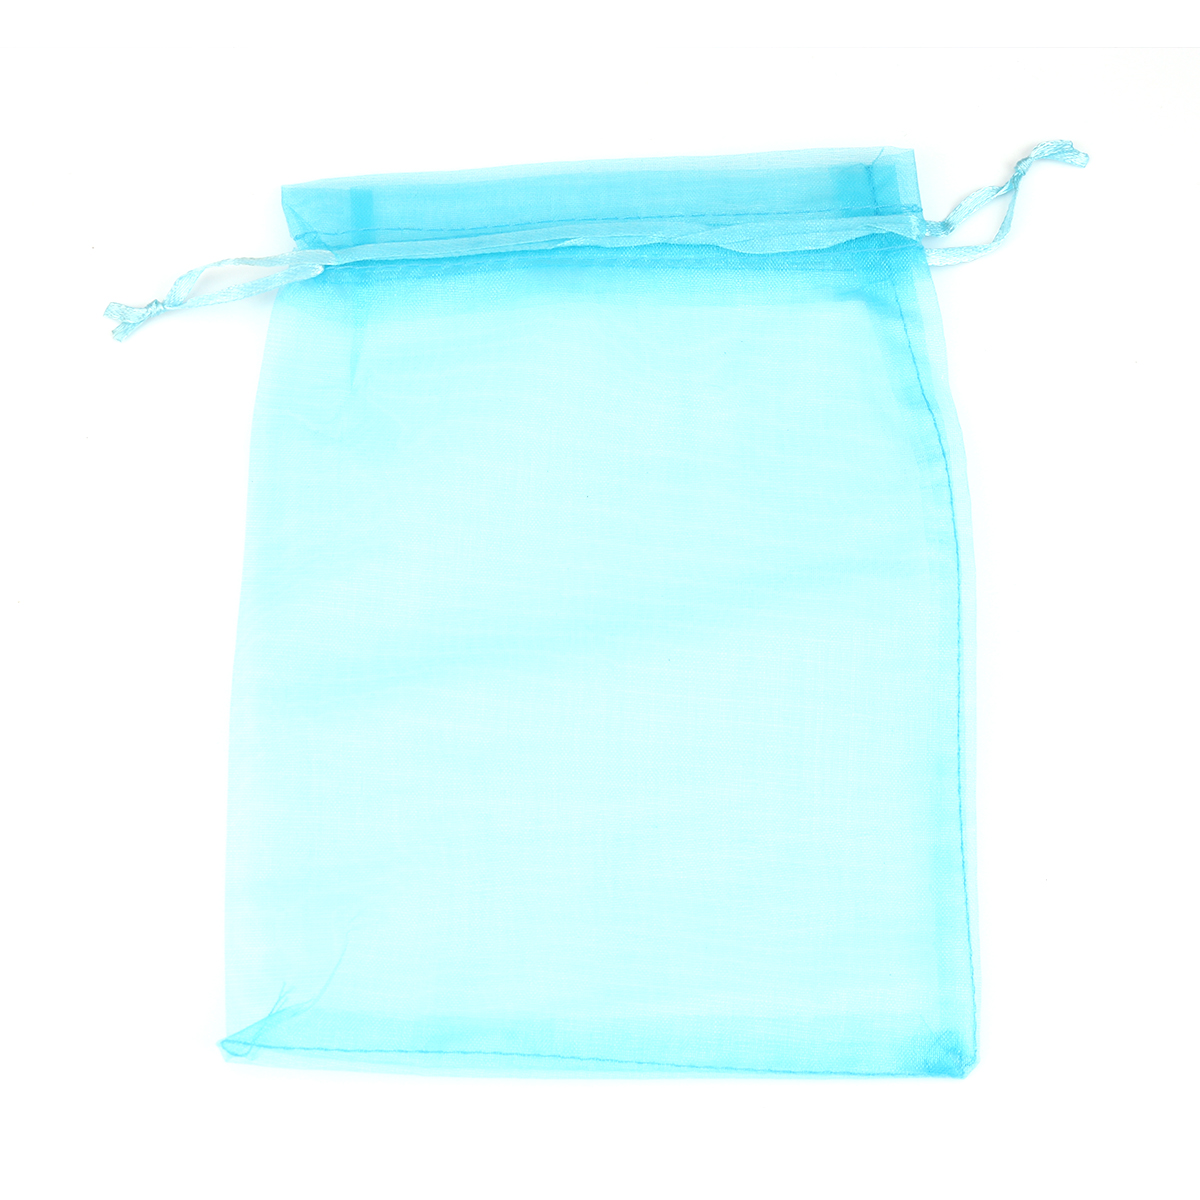 Picture of Wedding Gift Organza Jewelry Bags Drawstring Rectangle Lake Blue 20cm x15cm(7 7/8" x5 7/8"), (Usable Space: 17x14.5cm) 20 PCs